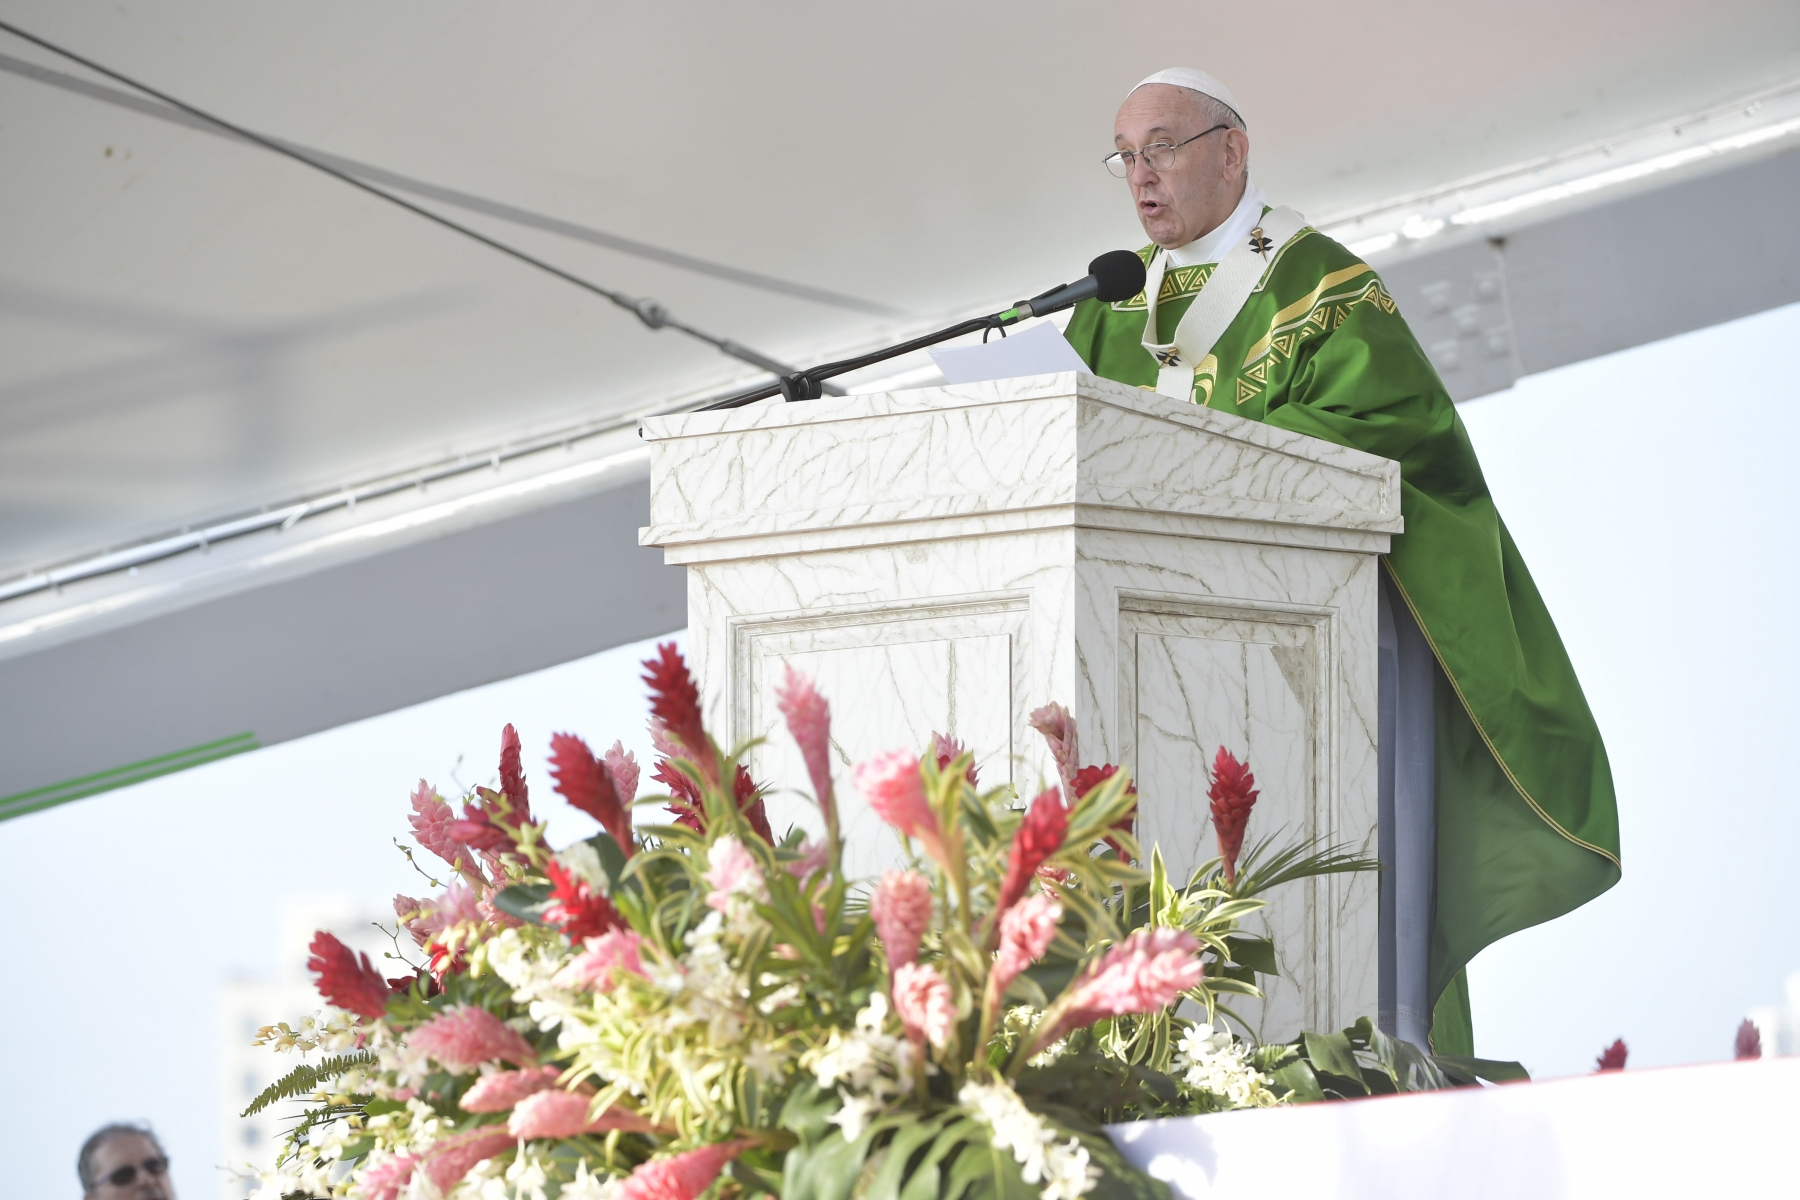 
Pope Francis celebrates the closing Mass for World Youth Day at Campo San Juan Pablo II in Panama City, Jan. 27. (Vatican Media/CNA)